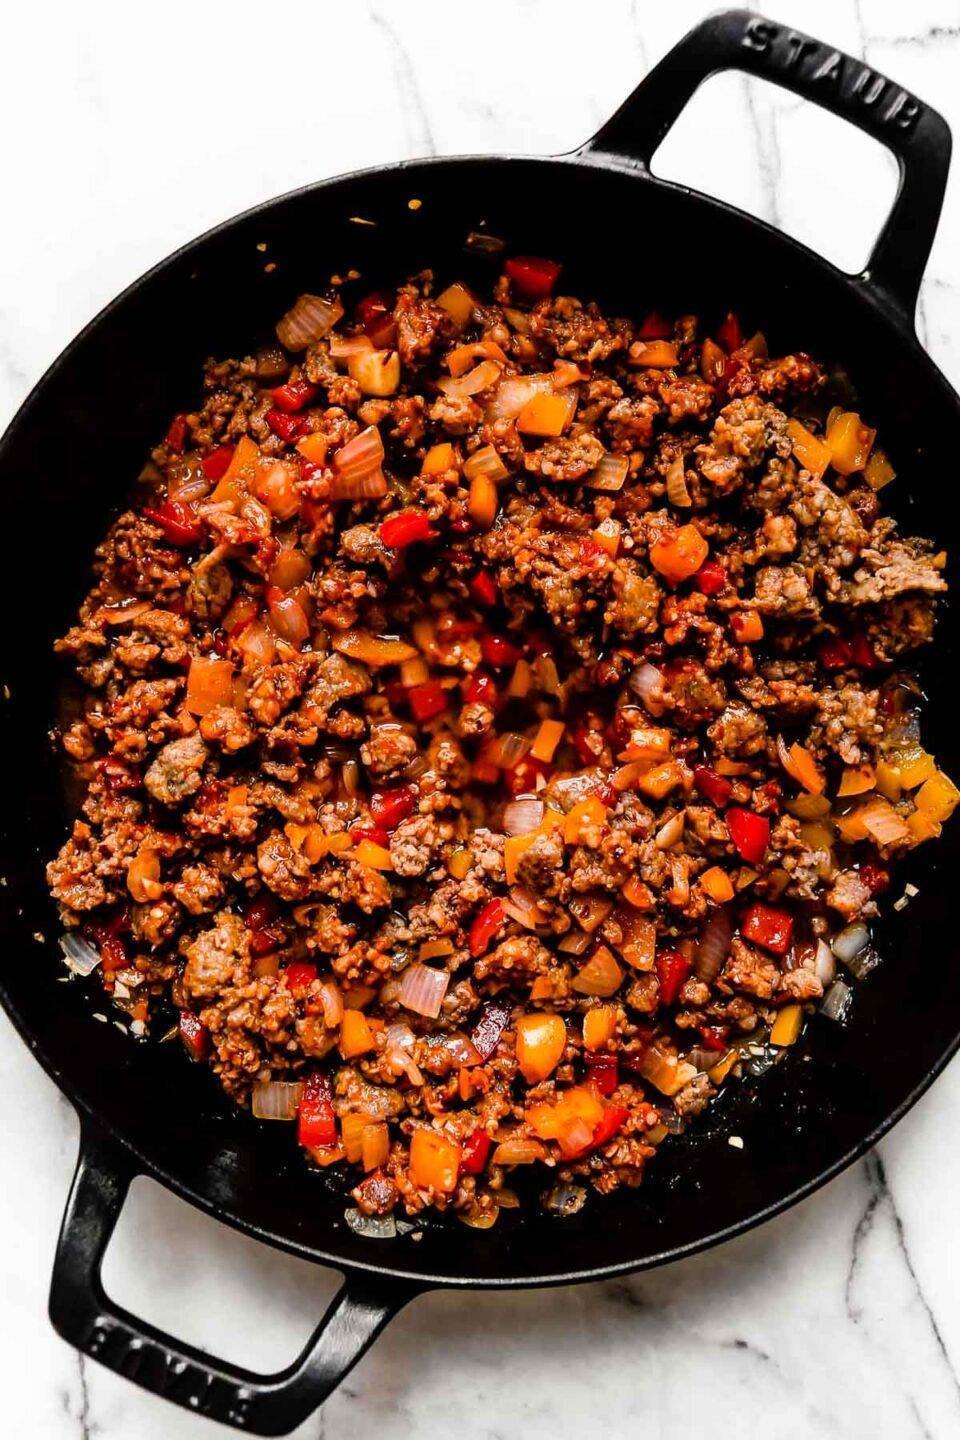 Crumbled and browned Italian sausage and softened bell pepper and onion mixed with tomato paste fill a large black Staub double handled skillet. The skillet sits atop a white and gray marble surface.